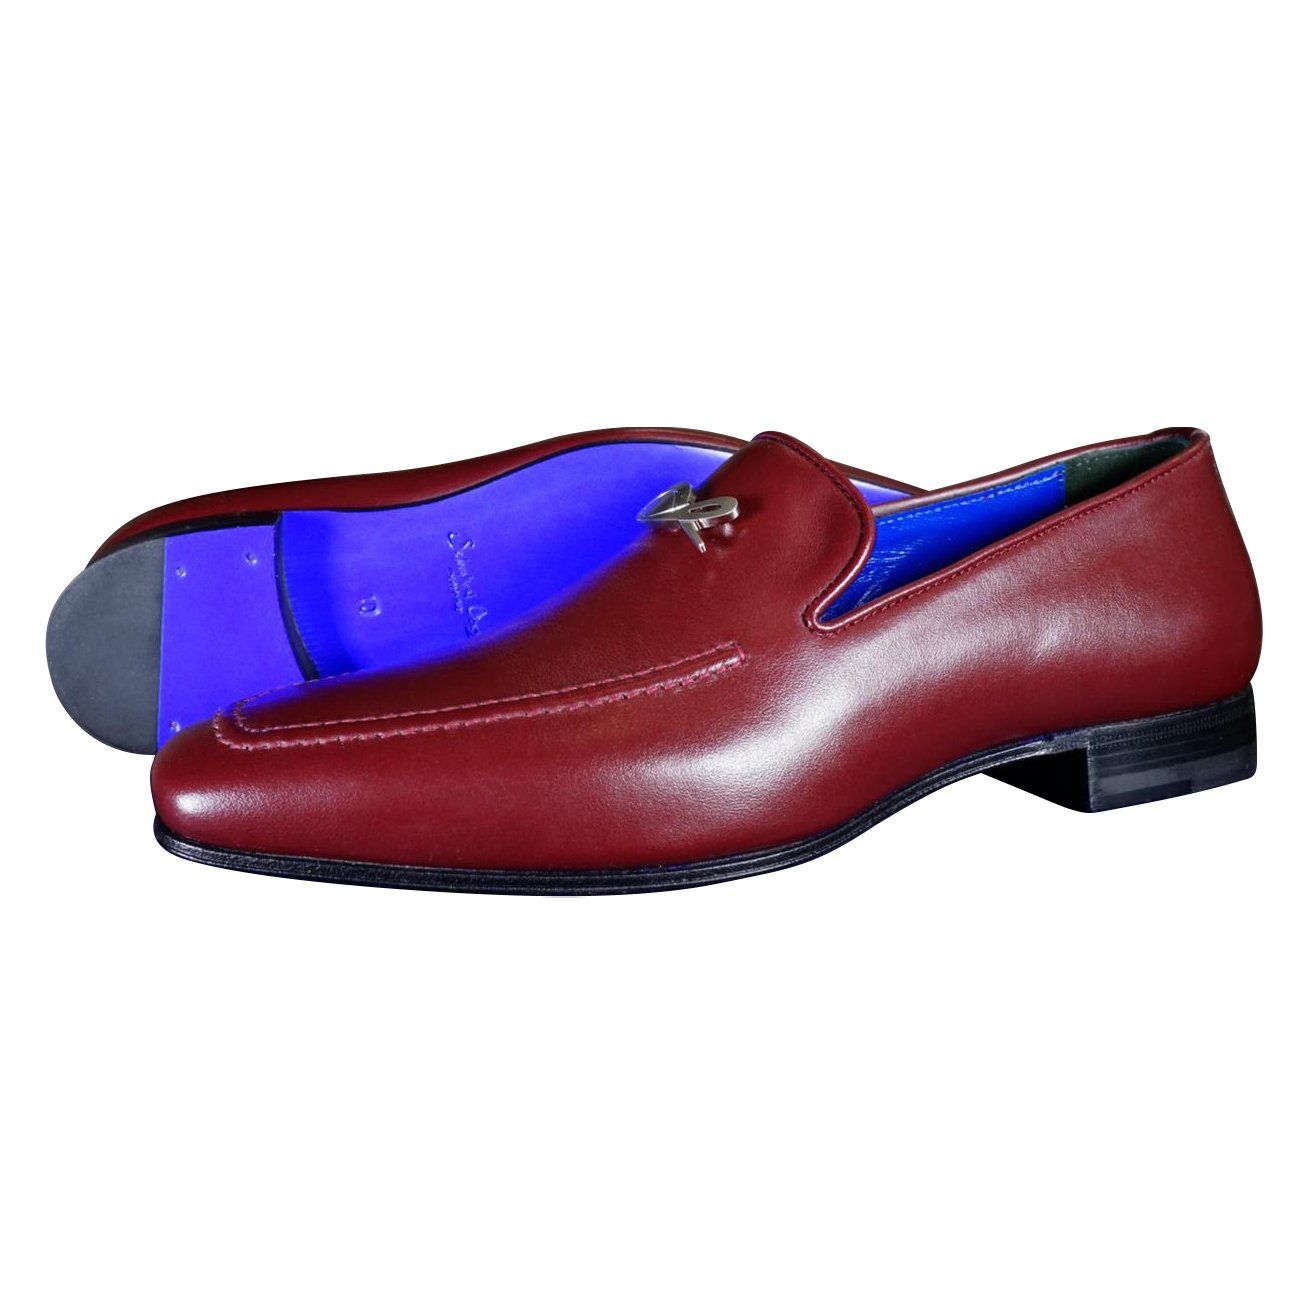 Bordo With Silver Hardware Leather Loafers